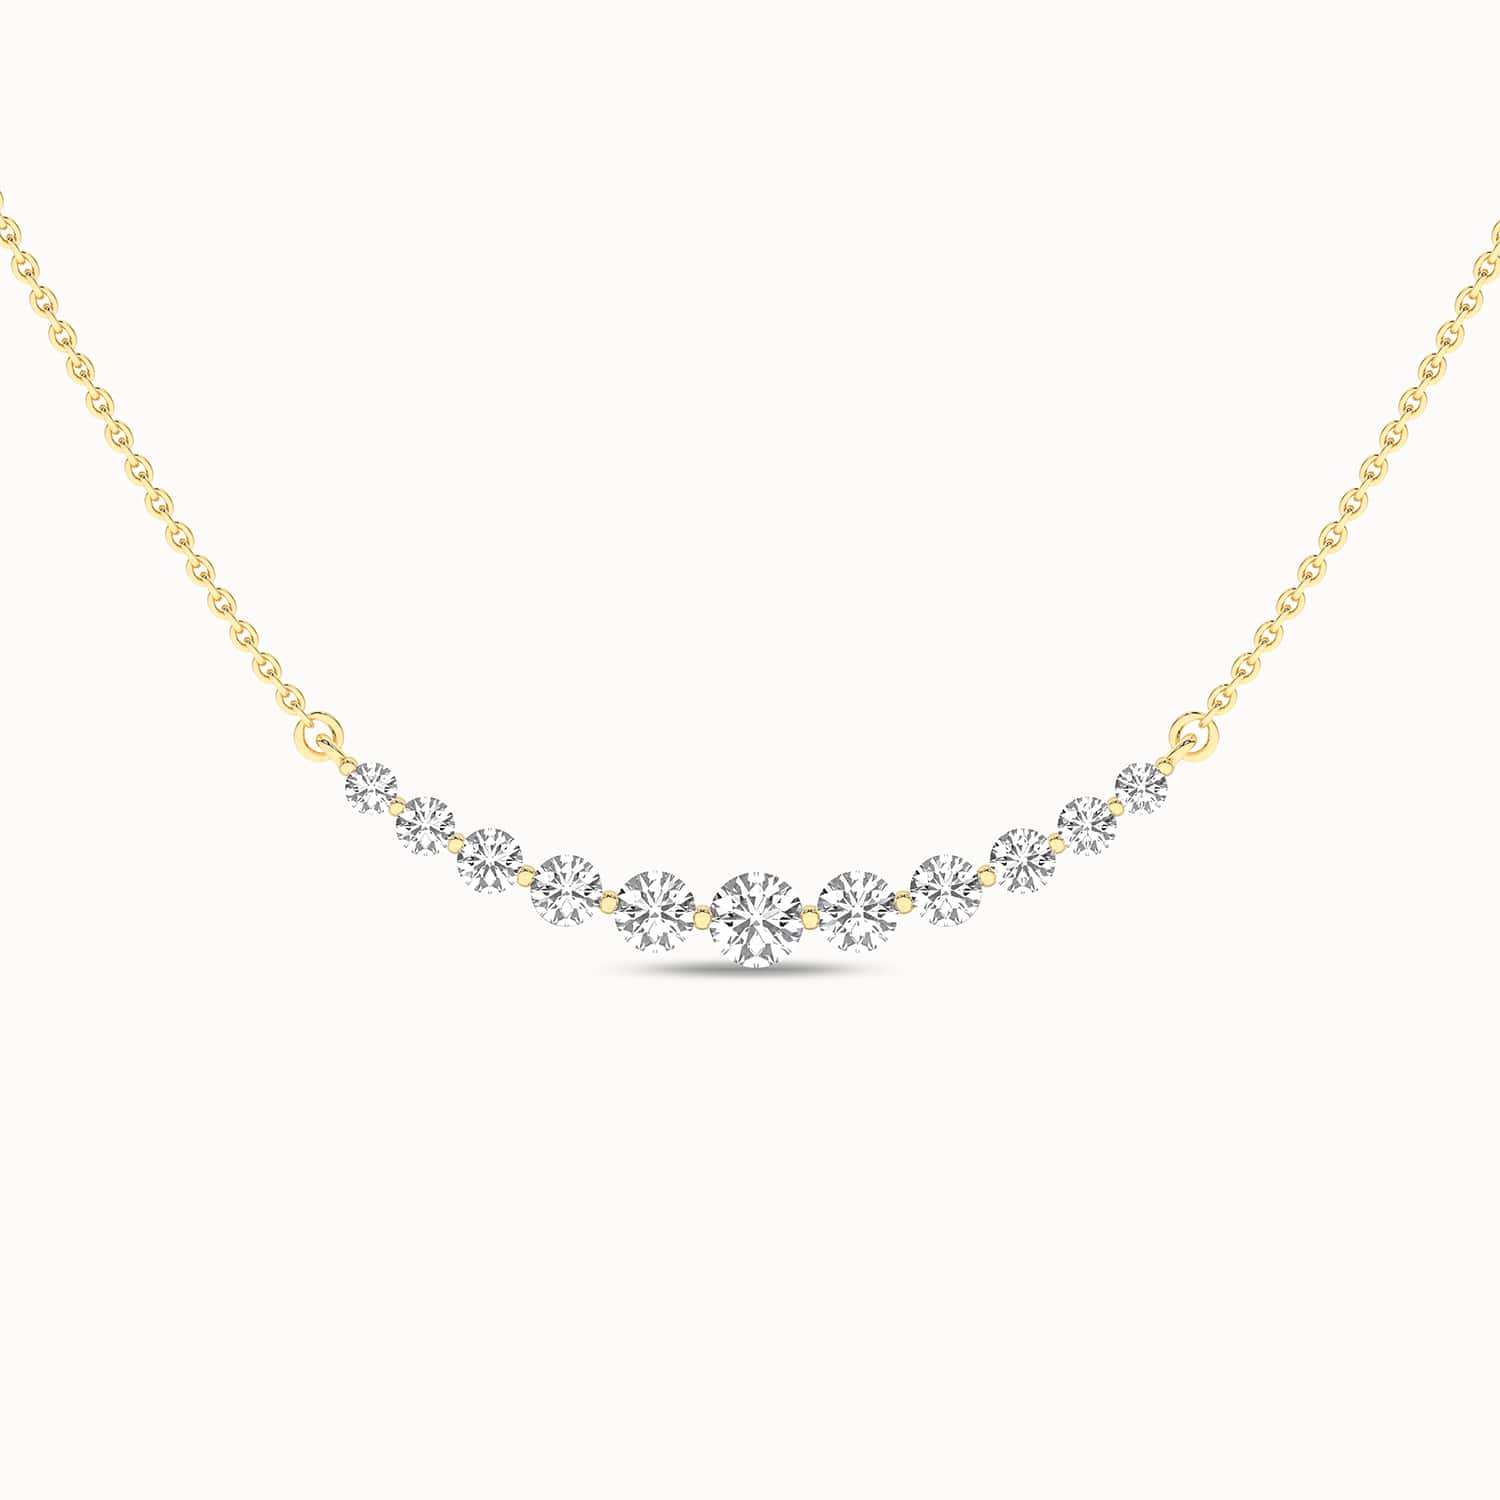 Captivating Necklace_Product Angle_1/2Ct. - 3